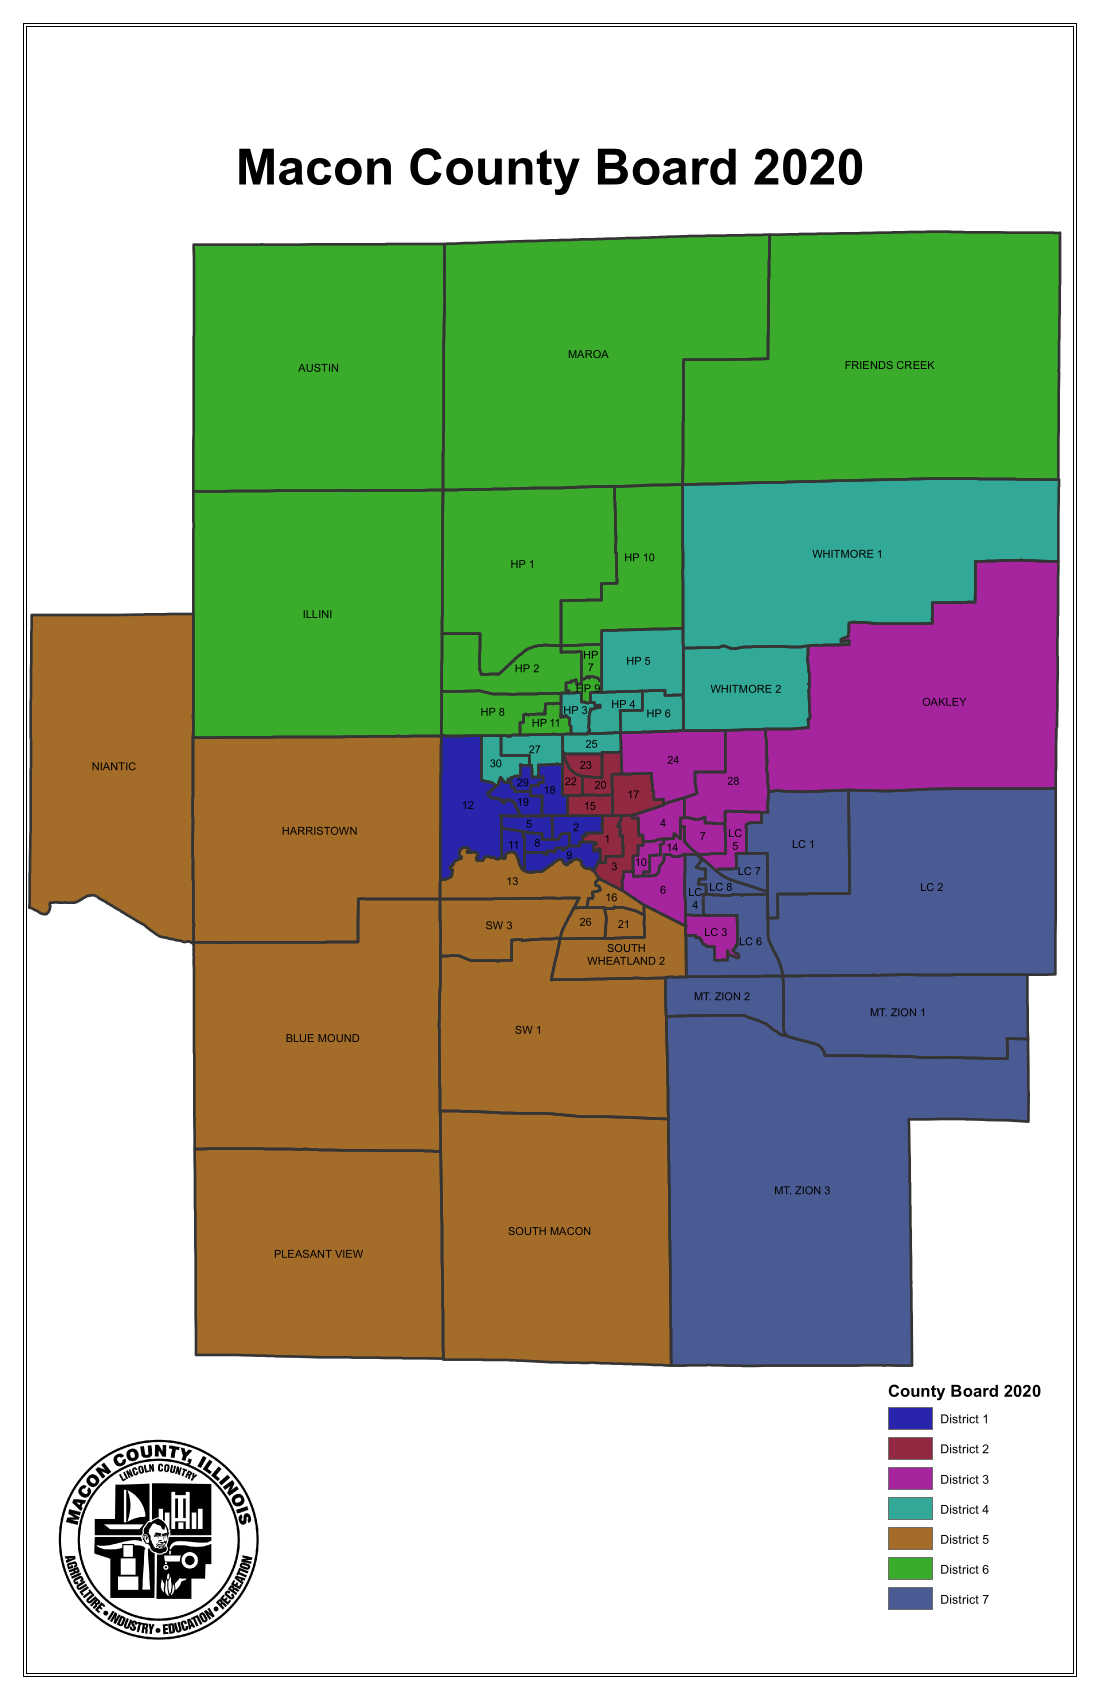 Macon County Voting District Map for the 2010 decade.